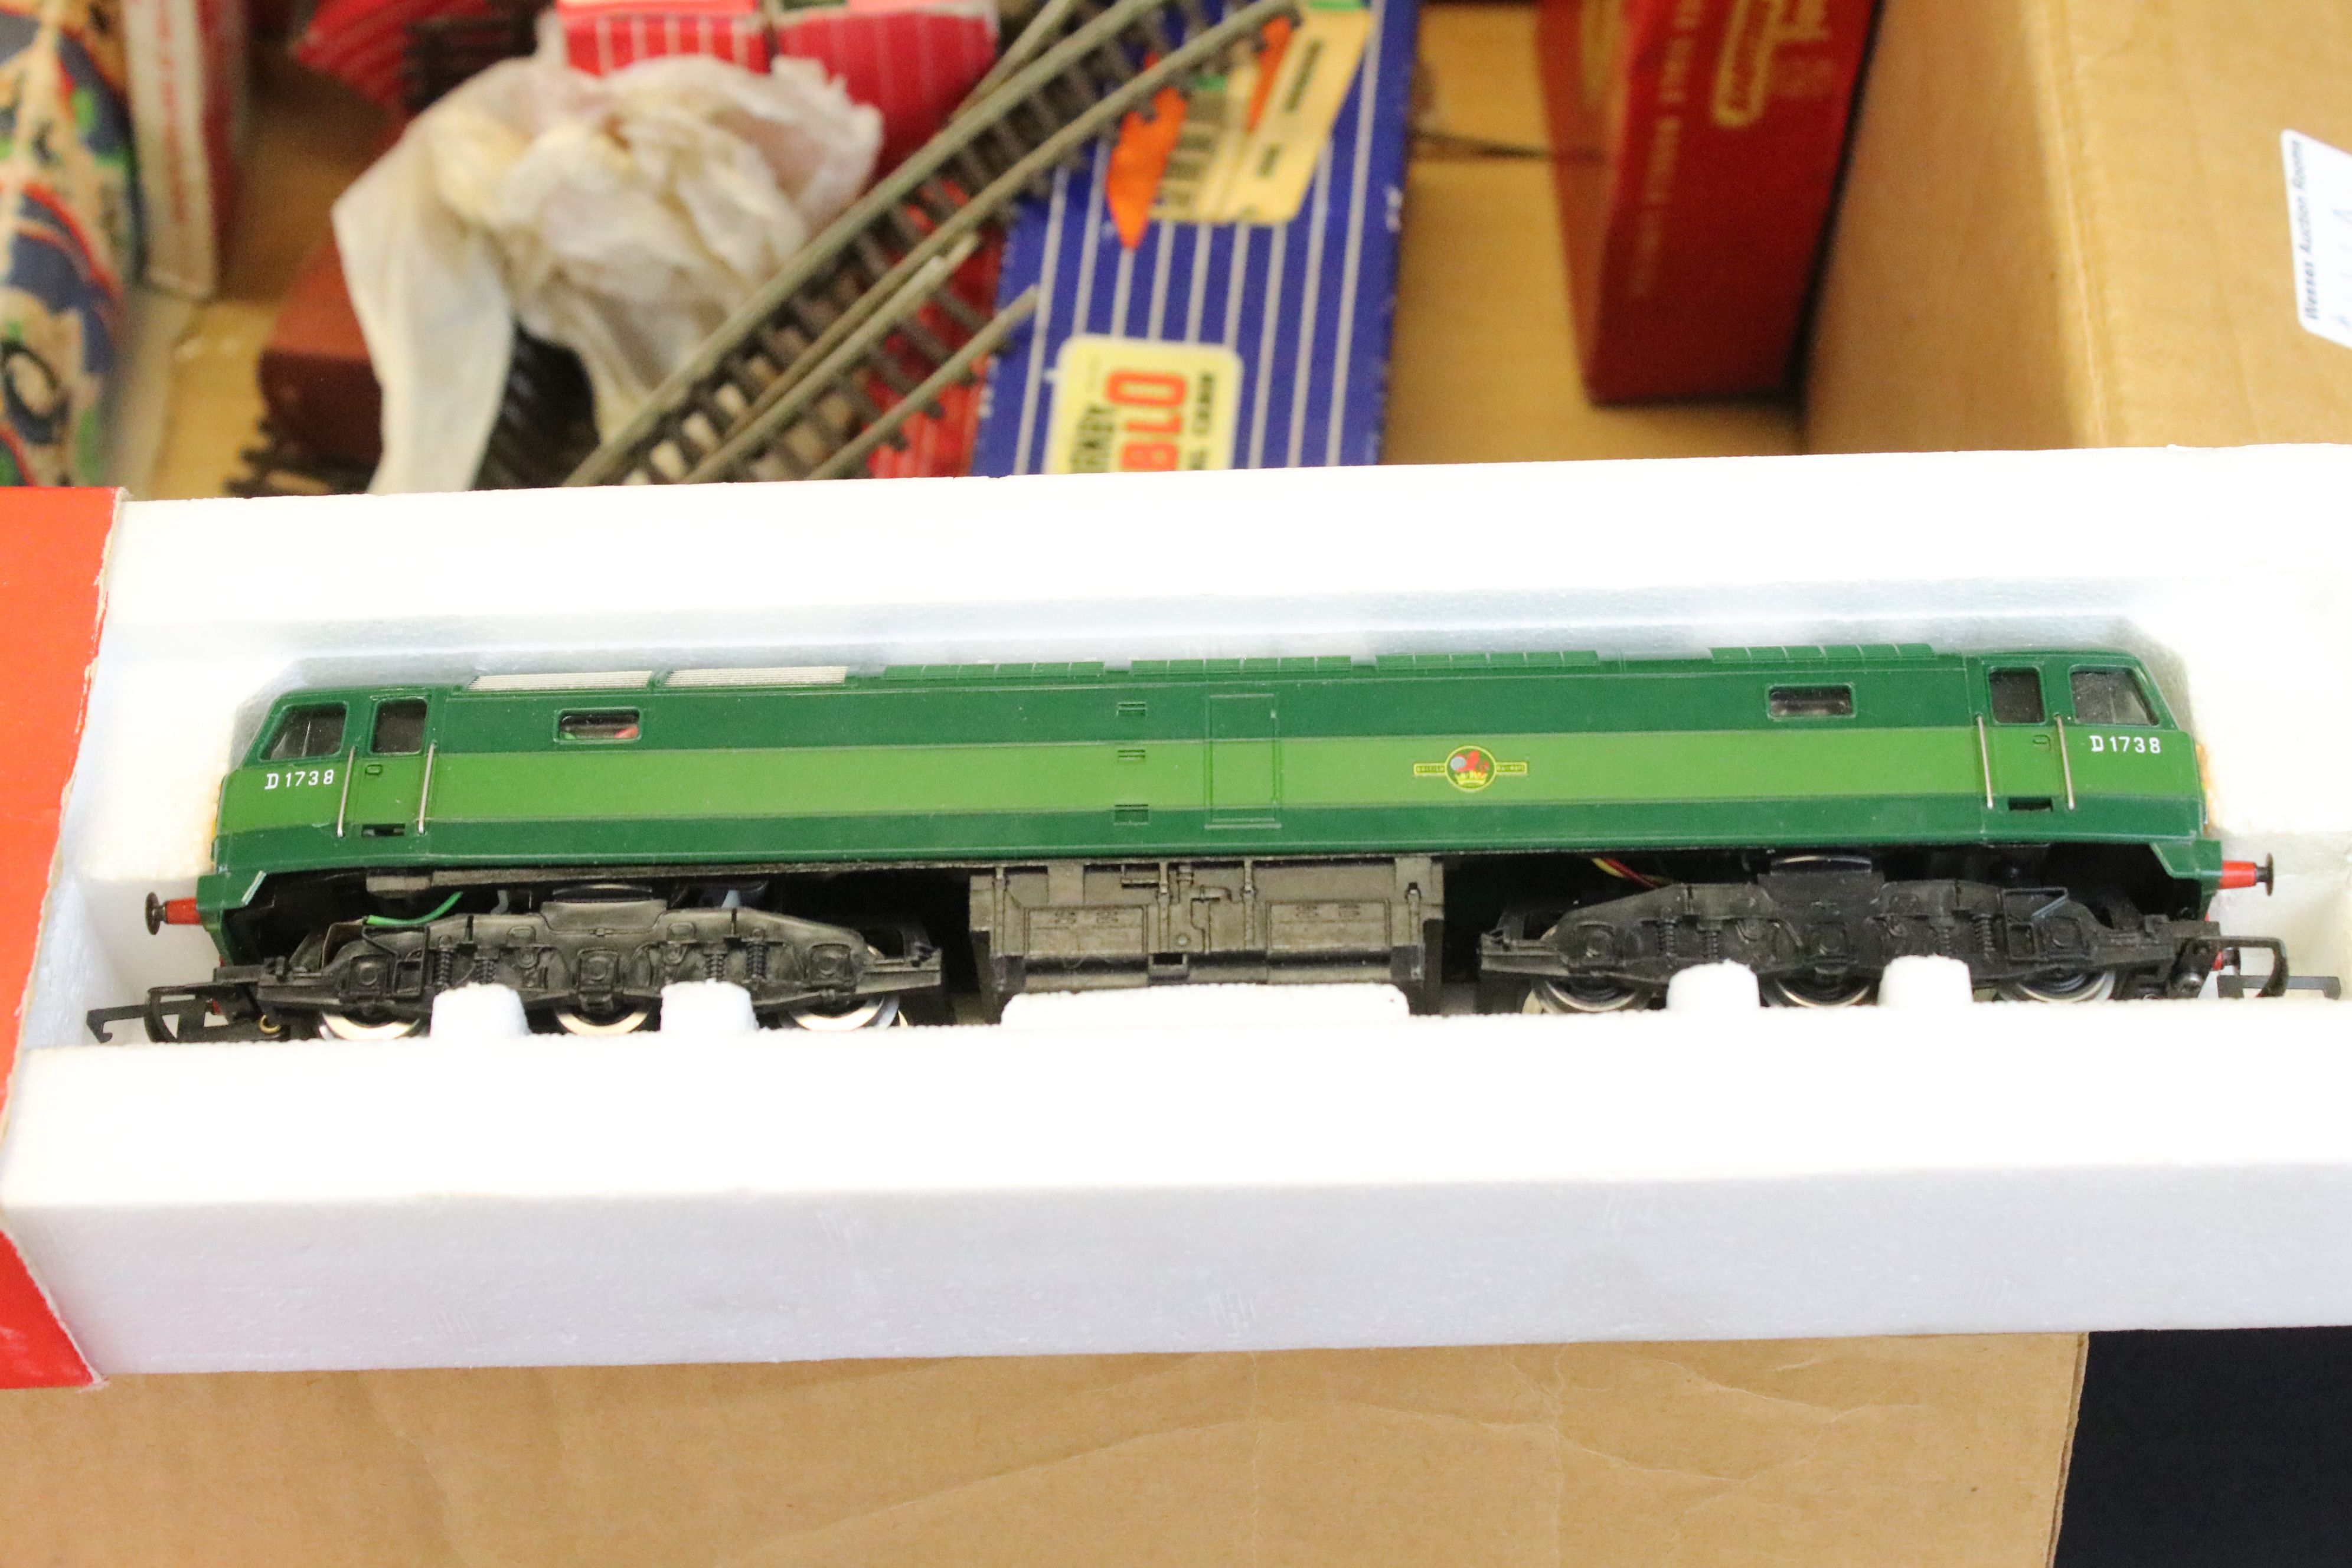 Collection of Hornby Dublo and OO gauge model railway to include boxed 2234 Deltic Diesel Electric - Image 10 of 11